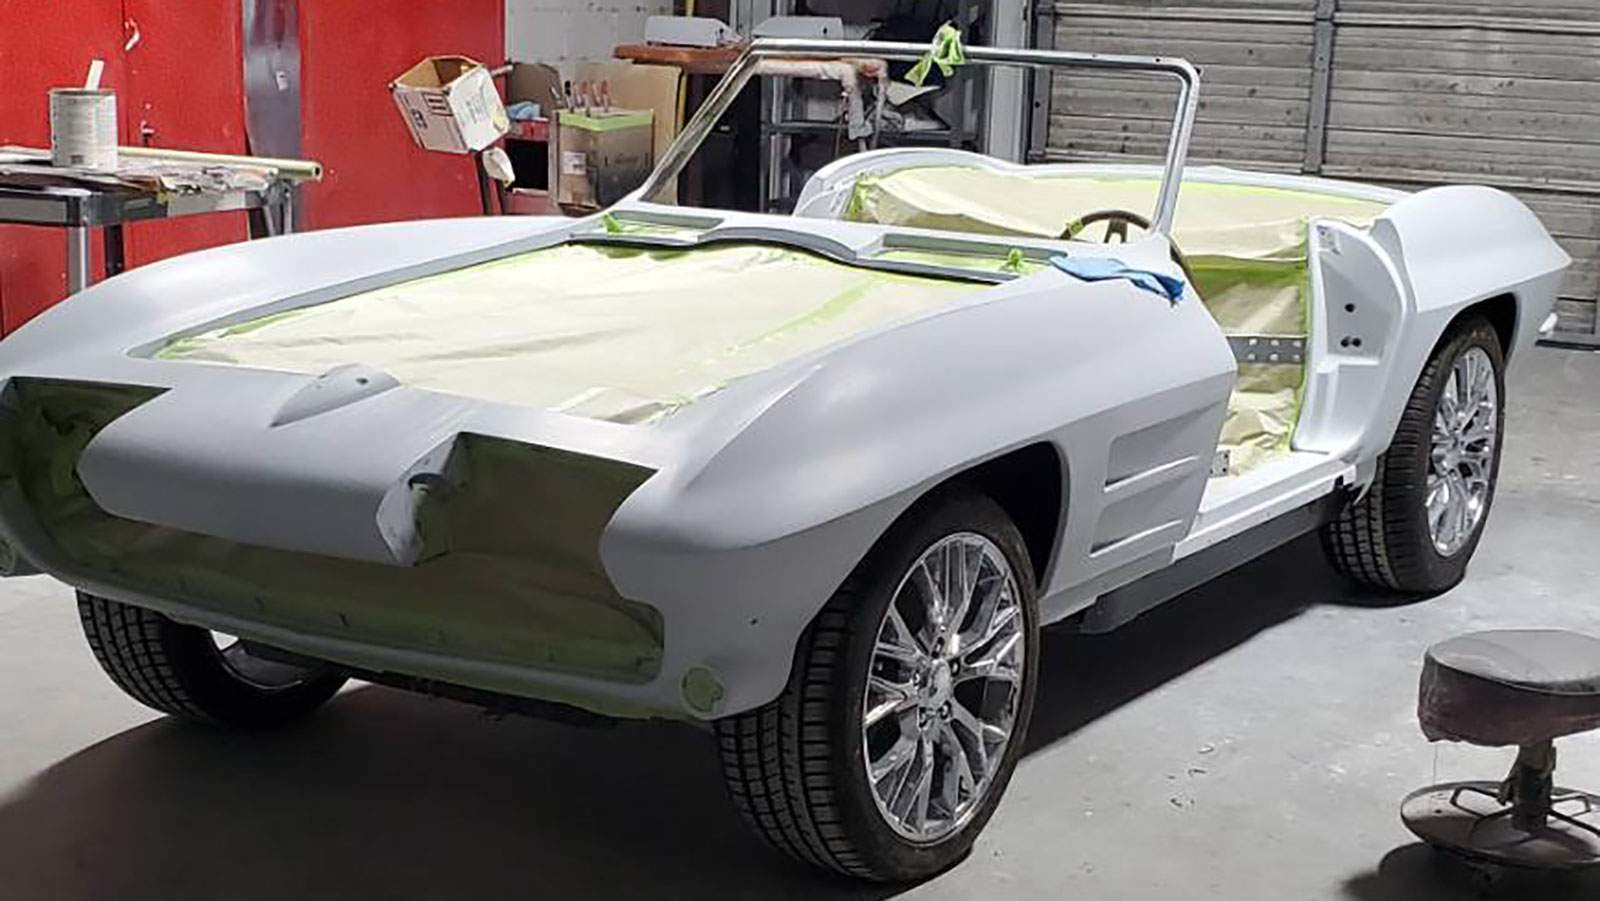 Corvettes worth $1M are trapped in buildings that crumbled in the Houston explosion